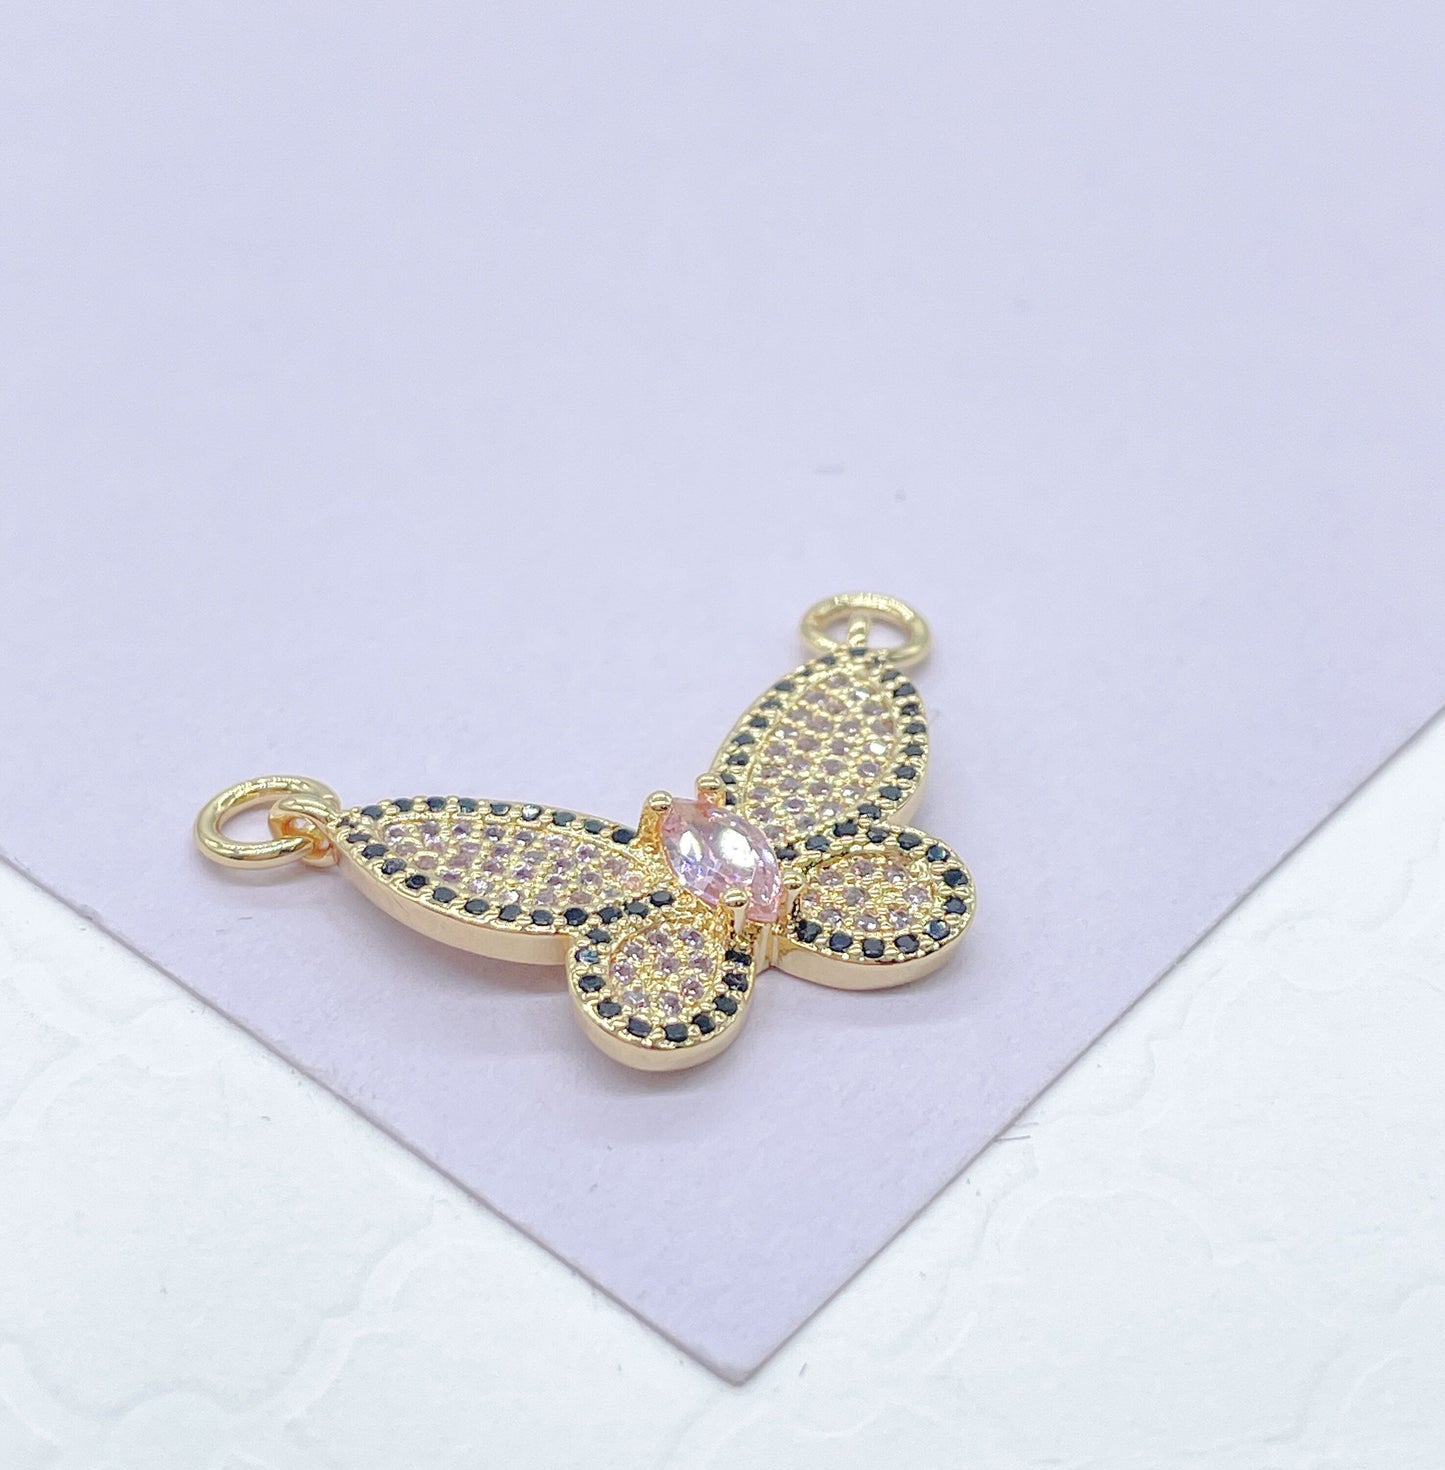 18k Gold Filled Baby Pink Butterfly Pendant With Black Pave Outline With Marquise Cut Center, For Jewlery Making, Dainty Butterfly